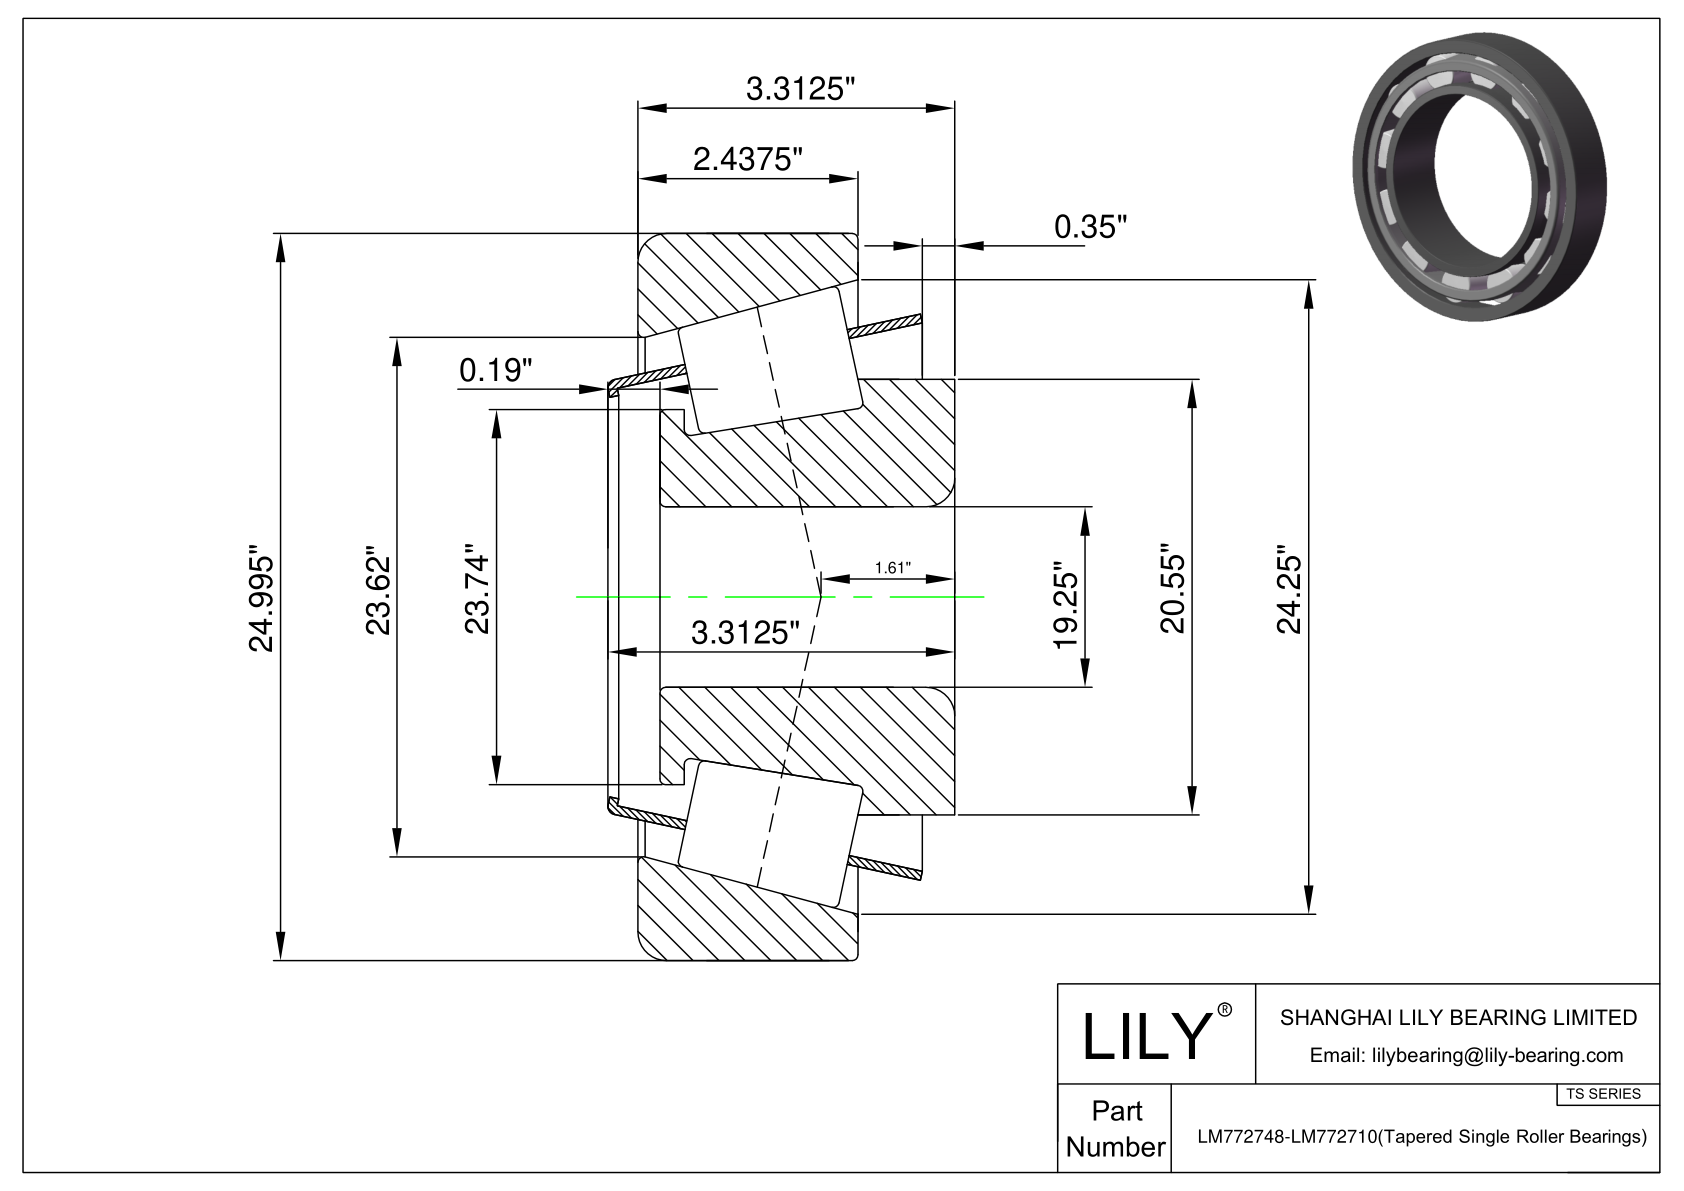 LM772748-LM772710 TS (Tapered Single Roller Bearings) (Imperial) cad drawing